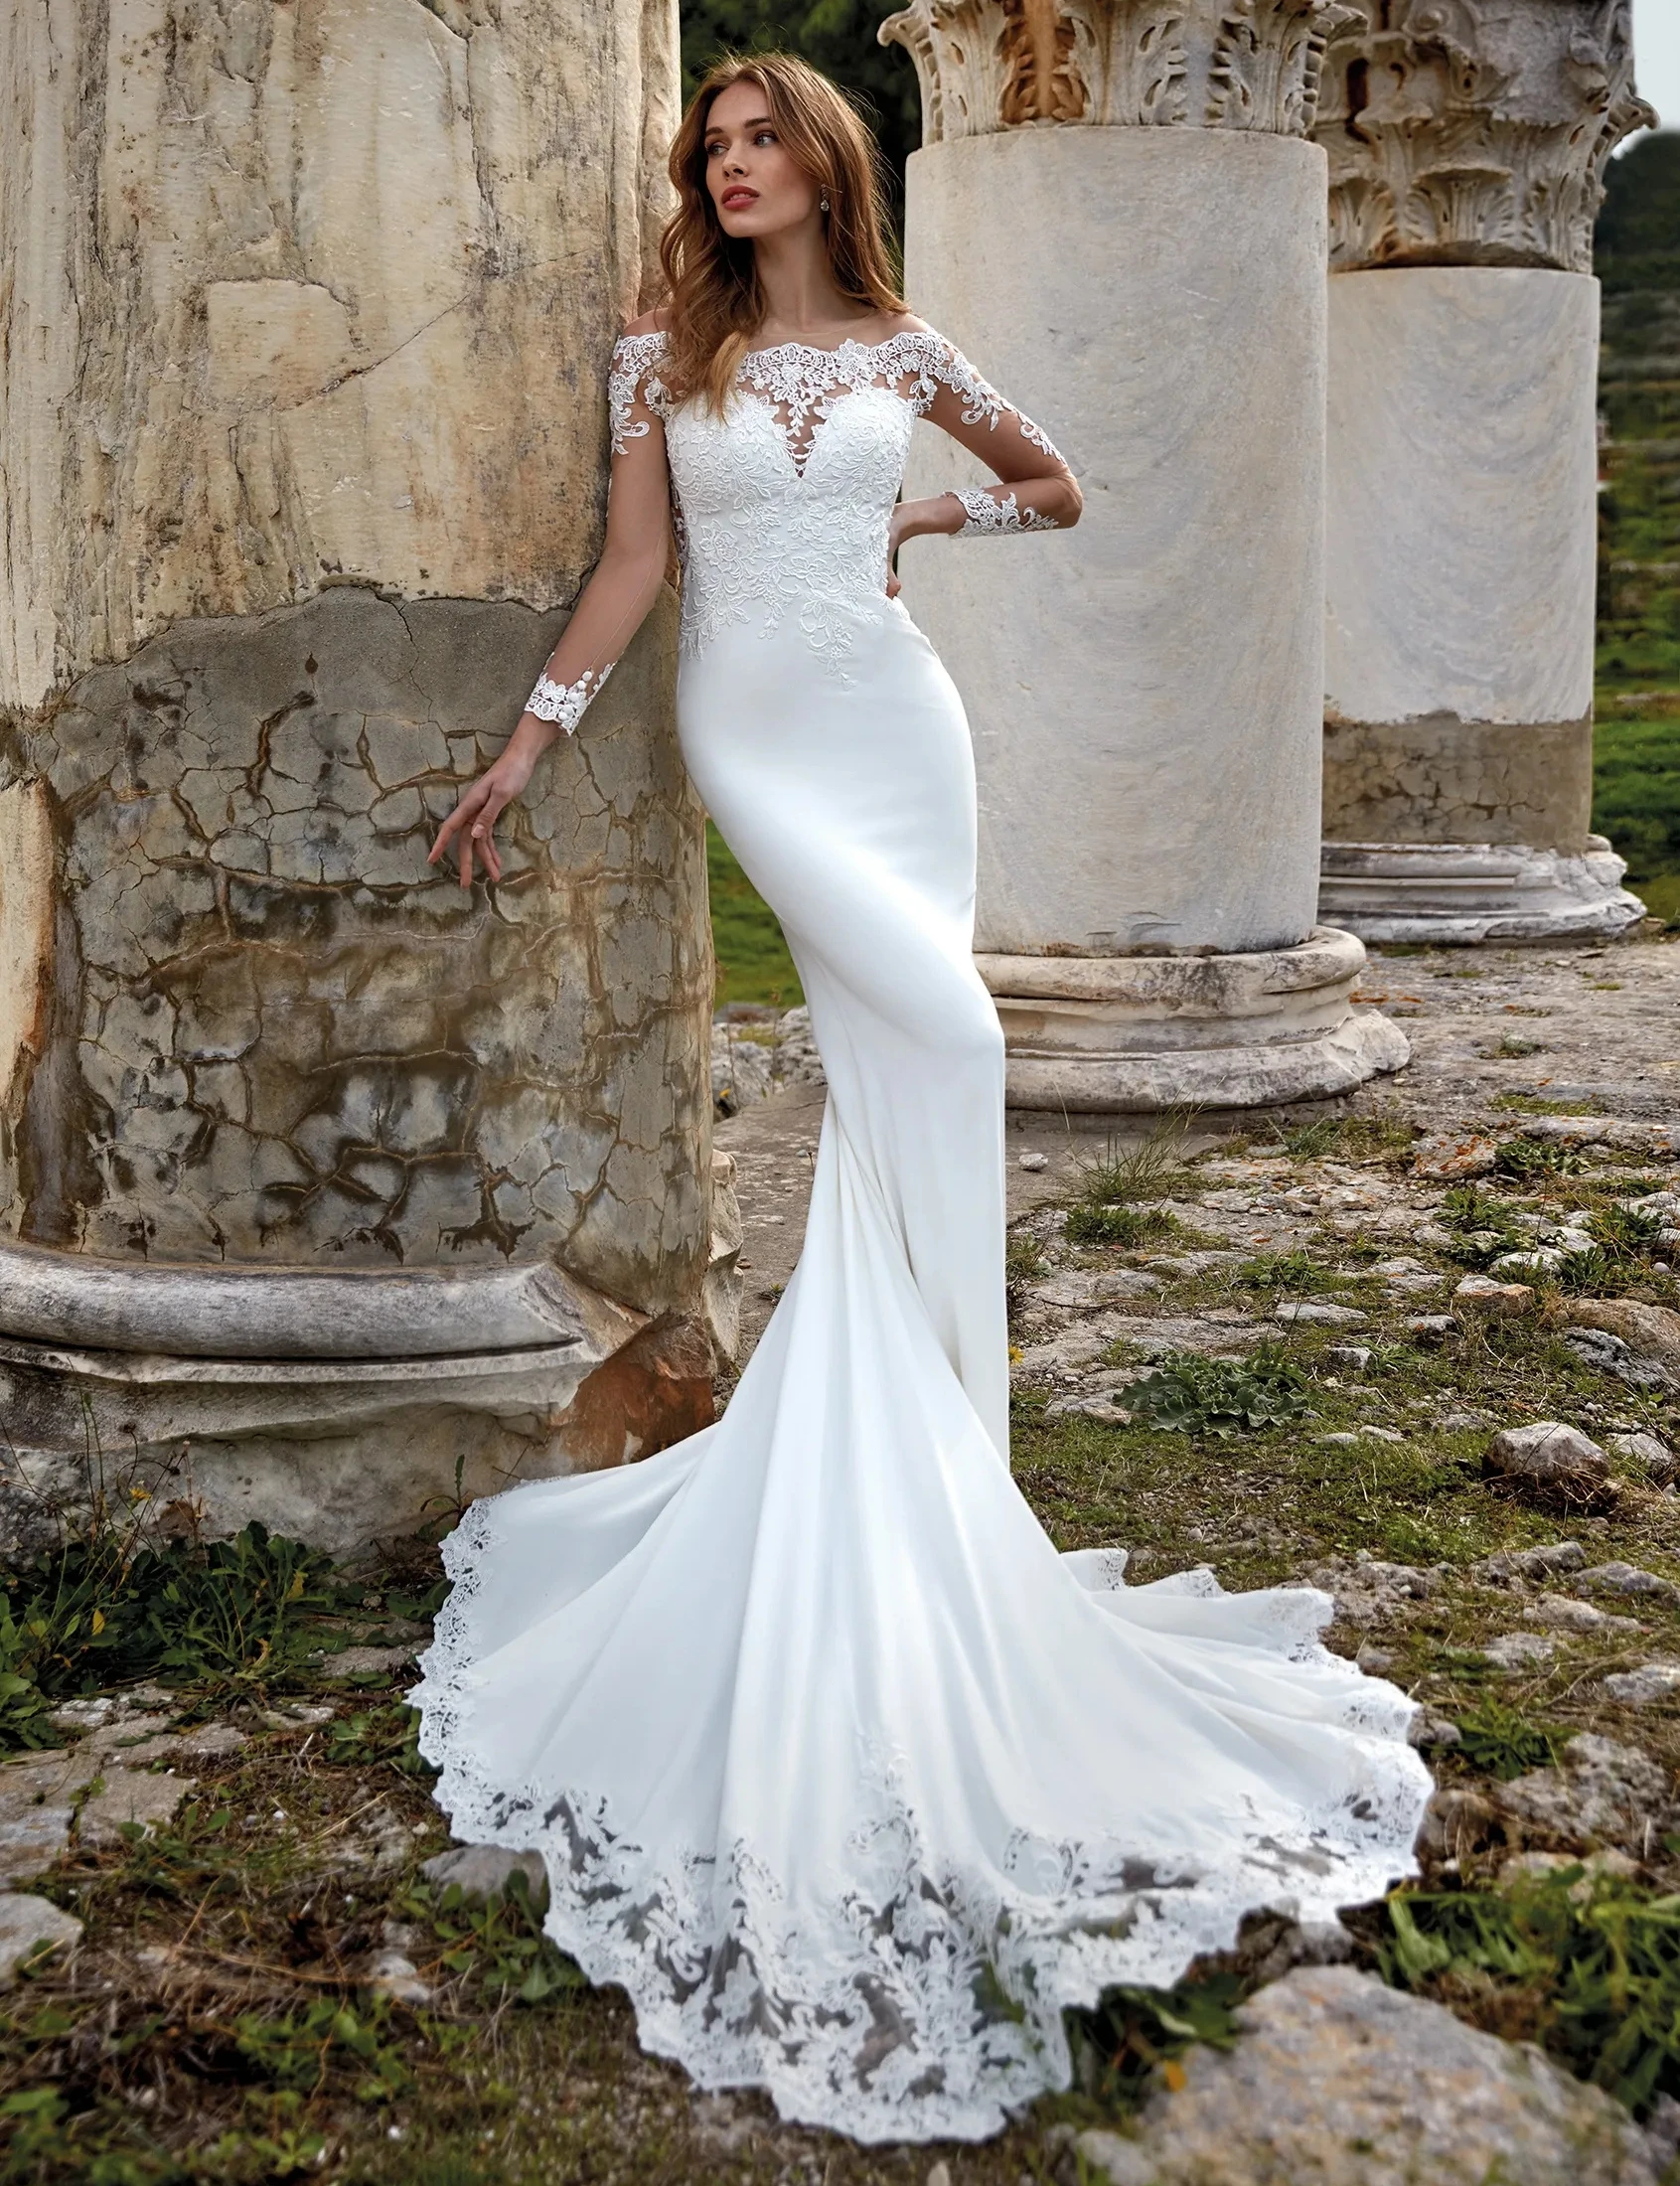 

Sexy Mermaid Wedding Dresses Sheer Neck Bridal Gowns with Full Sleeves Charming See Thru Button Back Long Train Robes de Mariee